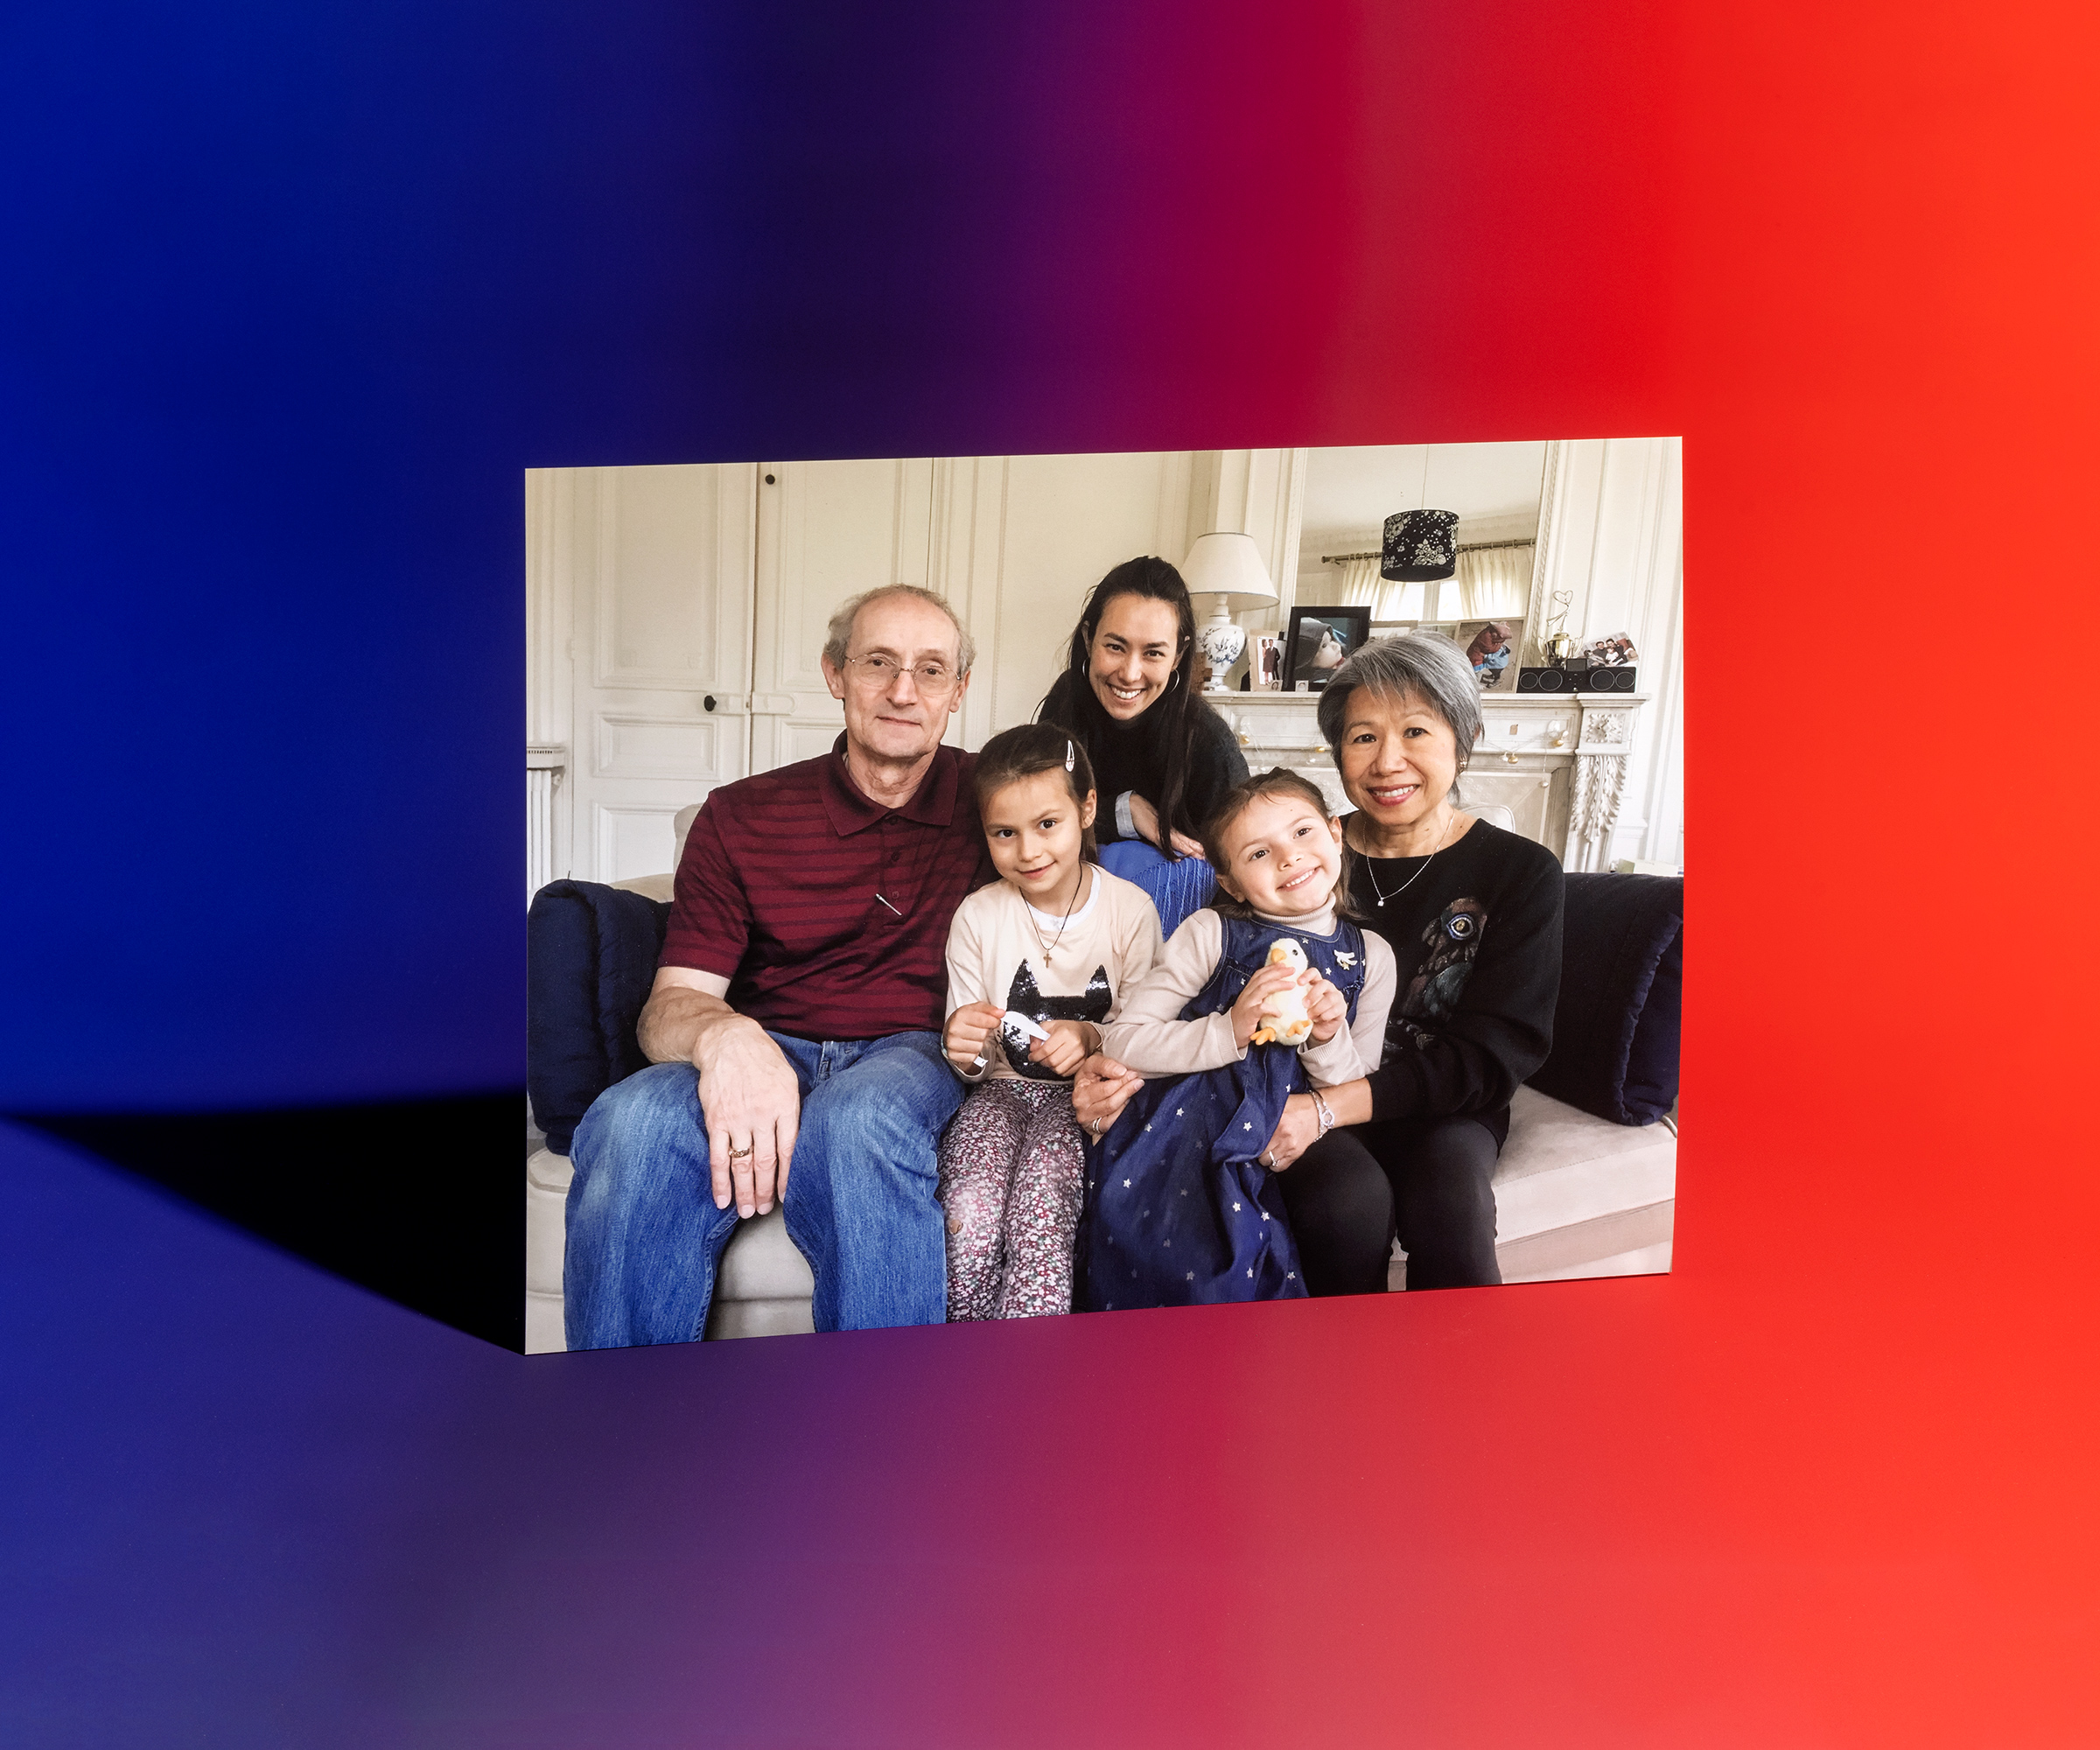 Stacey Pavesi Debré with her parents, Dave and Lonnie Pavesi, and daughters, in Paris in 2017 (Photo-Illustration by Ben Alper for TIME; Photo courtesy Stacey Pavesi Debré)